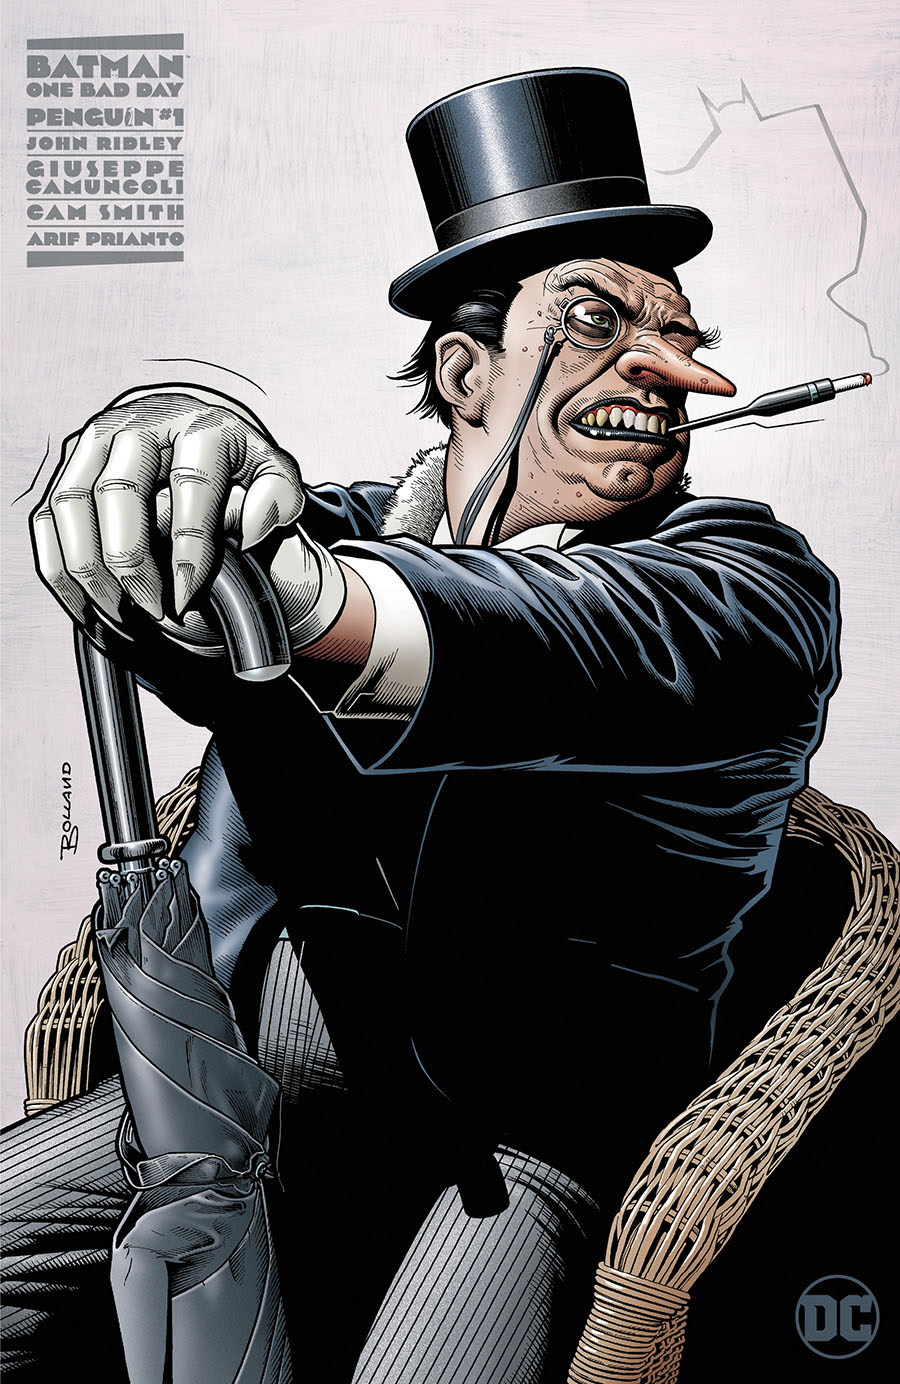 Batman One Bad Day Penguin #1 (One Shot) Cover F Incentive Brian Bolland Variant Cover